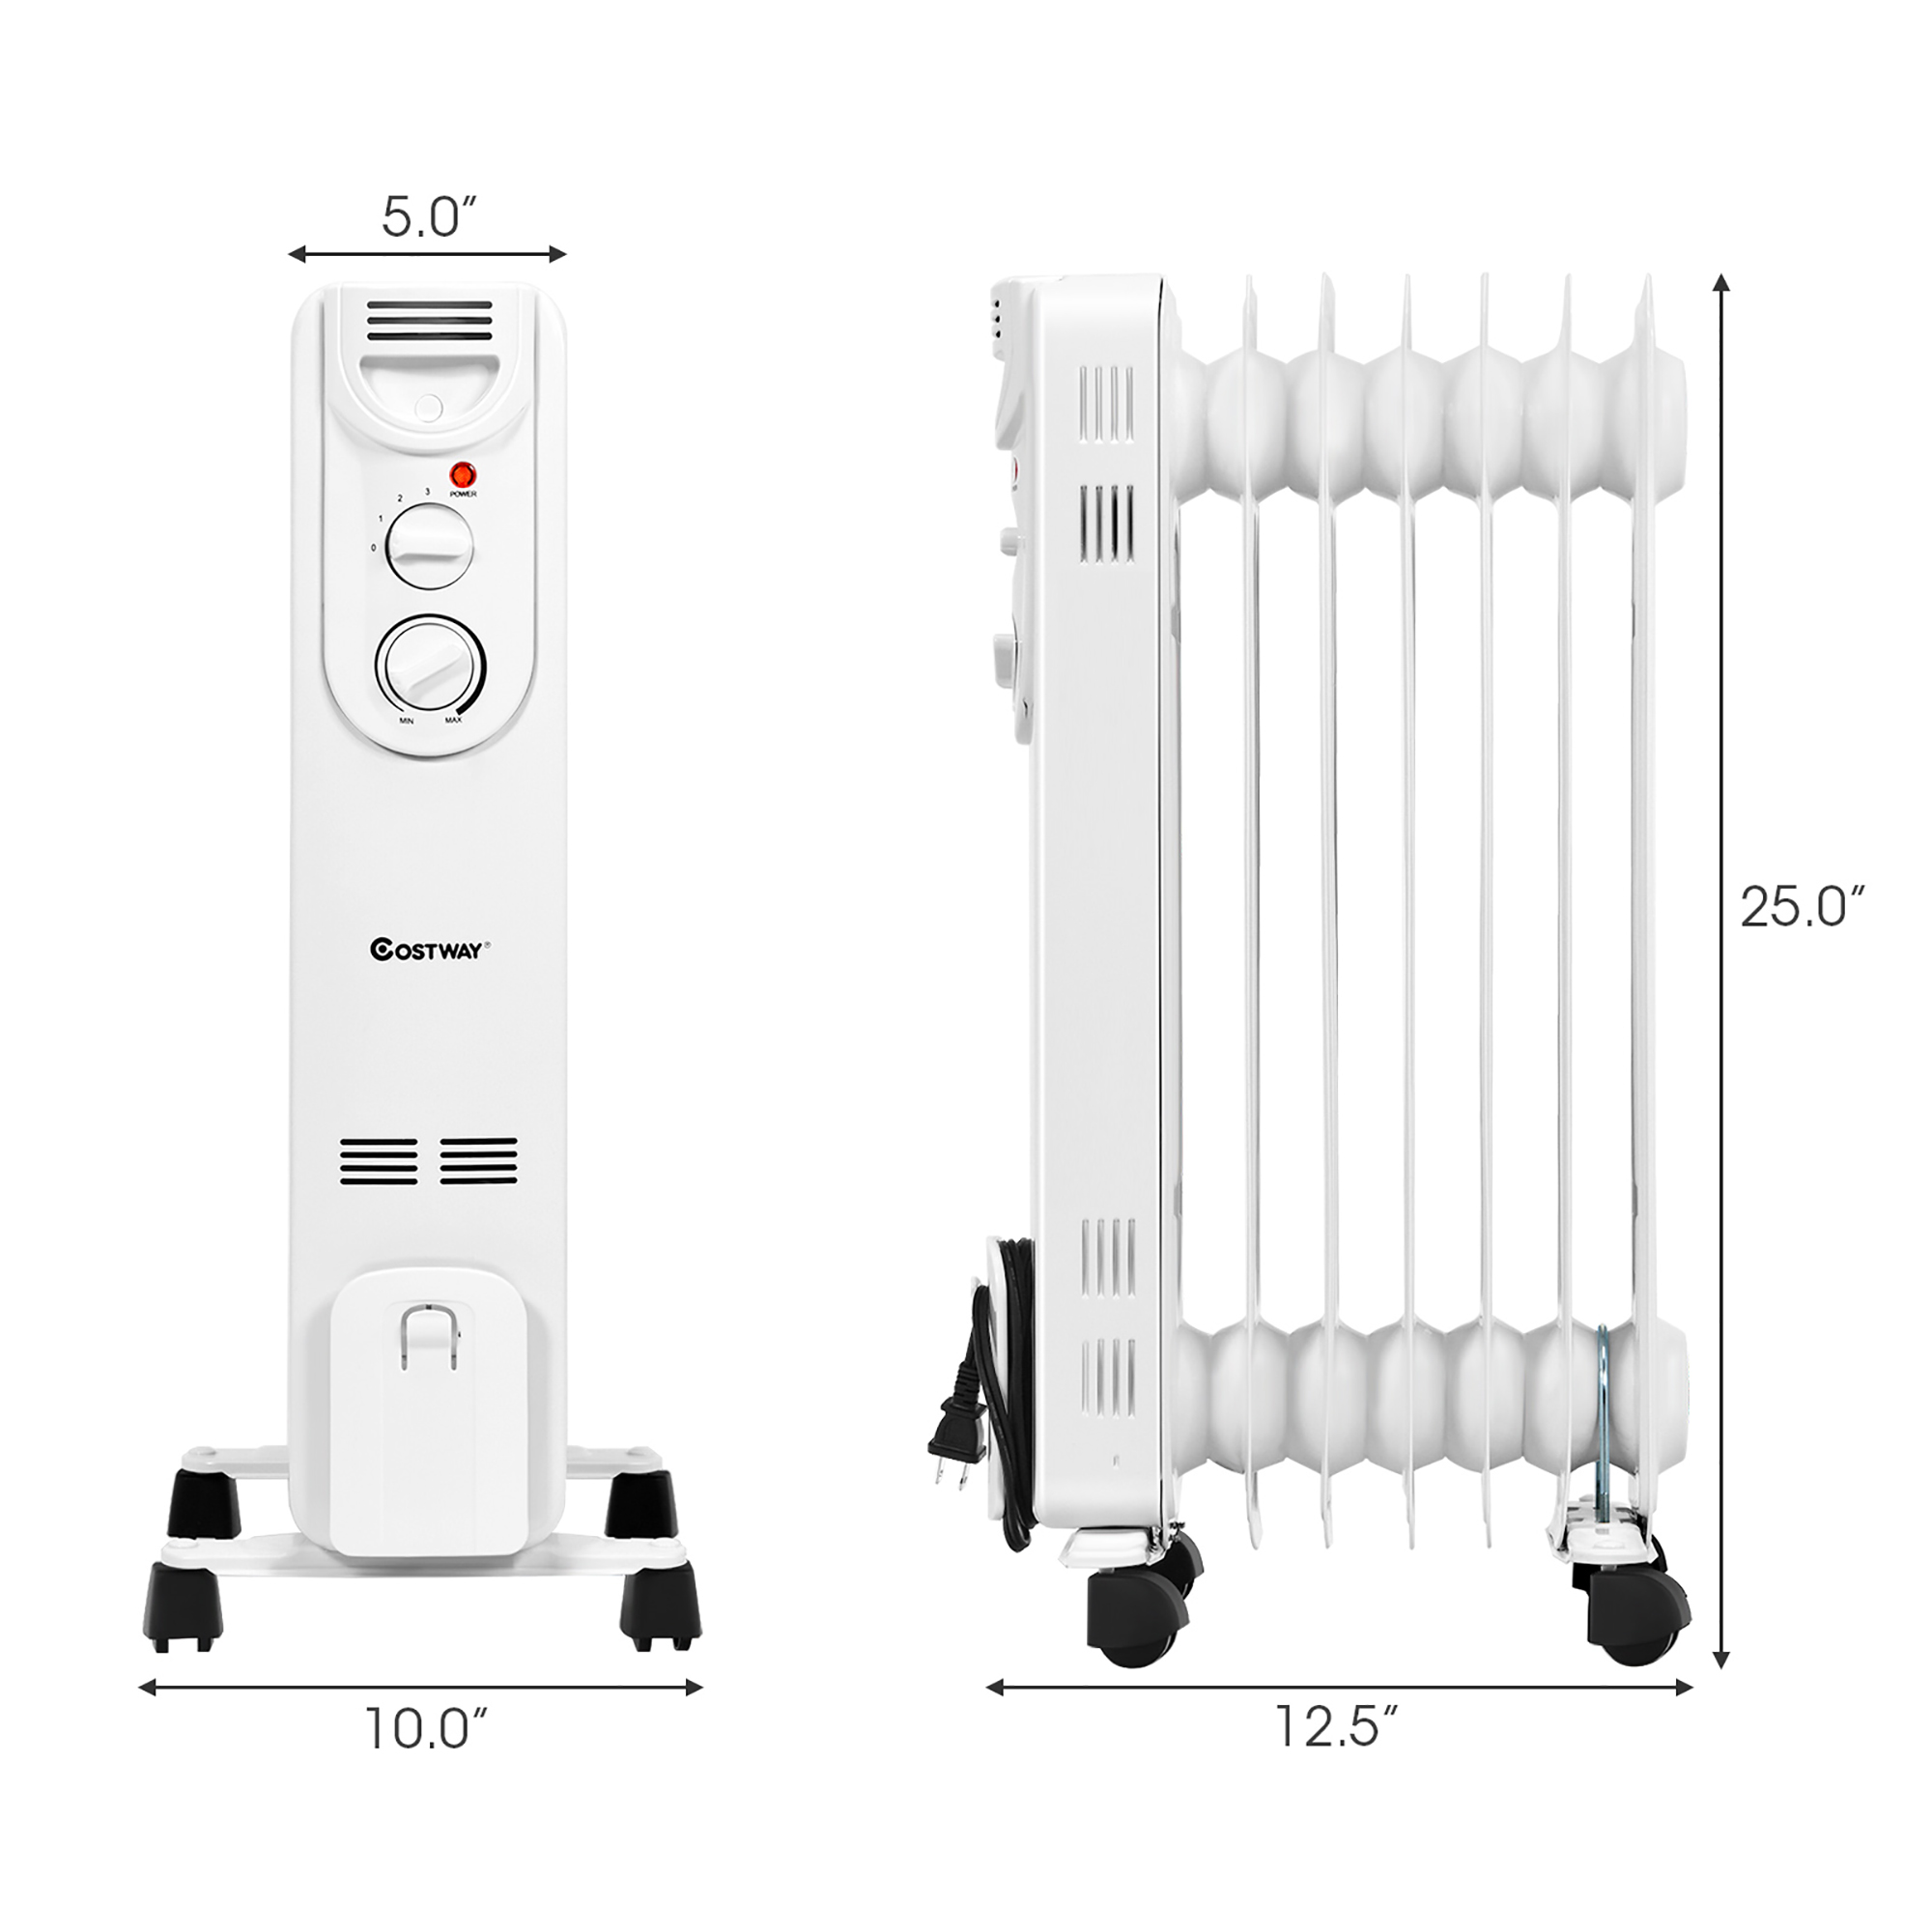 Costway 1500W Electric Oil Filled Radiator Space Heater 5-Fin Thermostat Room Radiant - image 4 of 10